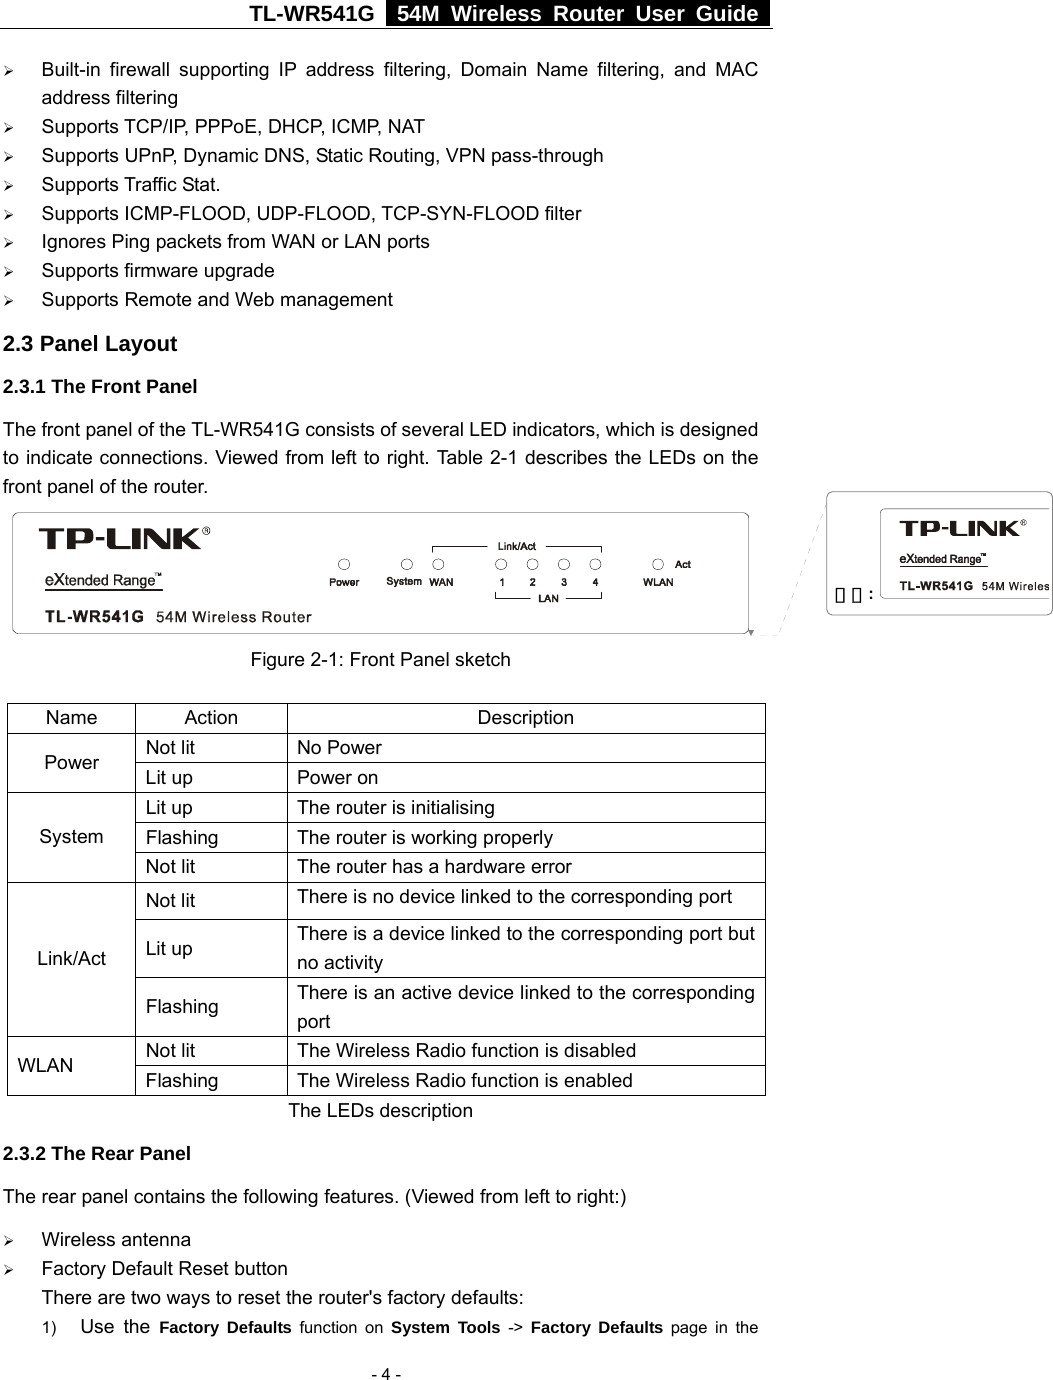 TL-WR541G   54M Wireless Router User Guide   - 4 -¾ Built-in firewall supporting IP address filtering, Domain Name filtering, and MAC address filtering ¾ Supports TCP/IP, PPPoE, DHCP, ICMP, NAT ¾ Supports UPnP, Dynamic DNS, Static Routing, VPN pass-through ¾ Supports Traffic Stat. ¾ Supports ICMP-FLOOD, UDP-FLOOD, TCP-SYN-FLOOD filter ¾ Ignores Ping packets from WAN or LAN ports ¾ Supports firmware upgrade ¾ Supports Remote and Web management 2.3 Panel Layout 2.3.1 The Front Panel The front panel of the TL-WR541G consists of several LED indicators, which is designed to indicate connections. Viewed from left to right. Table 2-1 describes the LEDs on the front panel of the router.    Figure 2-1: Front Panel sketch Name Action  Description Not lit  No Power Power  Lit up  Power on Lit up  The router is initialising Flashing  The router is working properly System Not lit  The router has a hardware error Not lit  There is no device linked to the corresponding port Lit up  There is a device linked to the corresponding port but no activity Link/Act Flashing  There is an active device linked to the corresponding port Not lit  The Wireless Radio function is disabled WLAN  Flashing  The Wireless Radio function is enabled The LEDs description 2.3.2 The Rear Panel The rear panel contains the following features. (Viewed from left to right:) ¾ Wireless antenna ¾ Factory Default Reset button There are two ways to reset the router&apos;s factory defaults: 1)  Use the Factory Defaults function on System Tools -&gt; Factory Defaults page in the 刪除: 